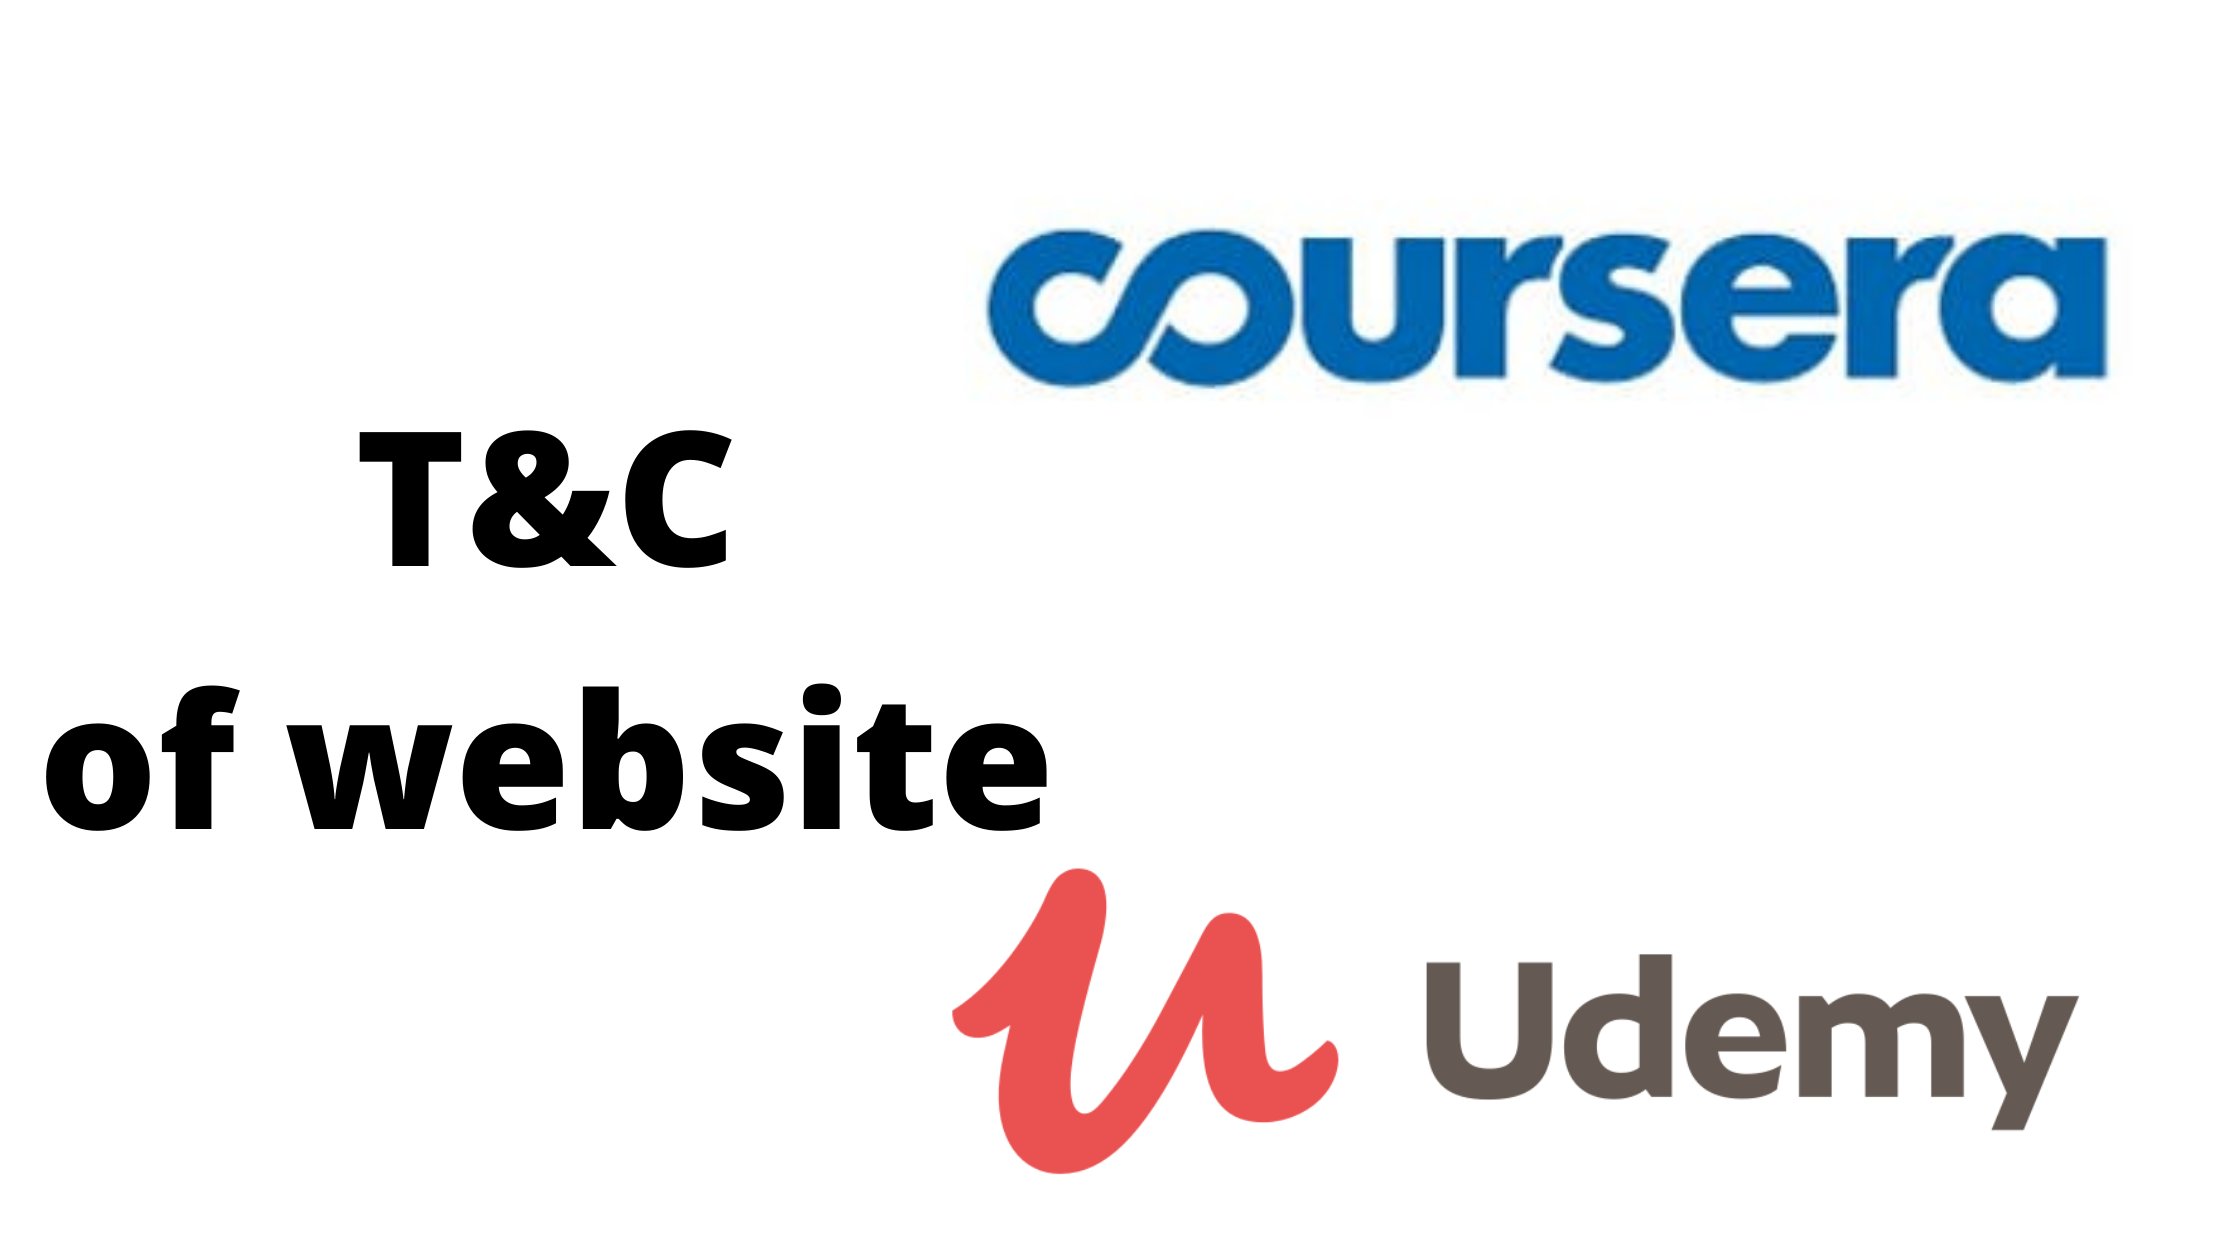 Drafting Terms and condition for an E-learning Website Like Udemy Or Coursera